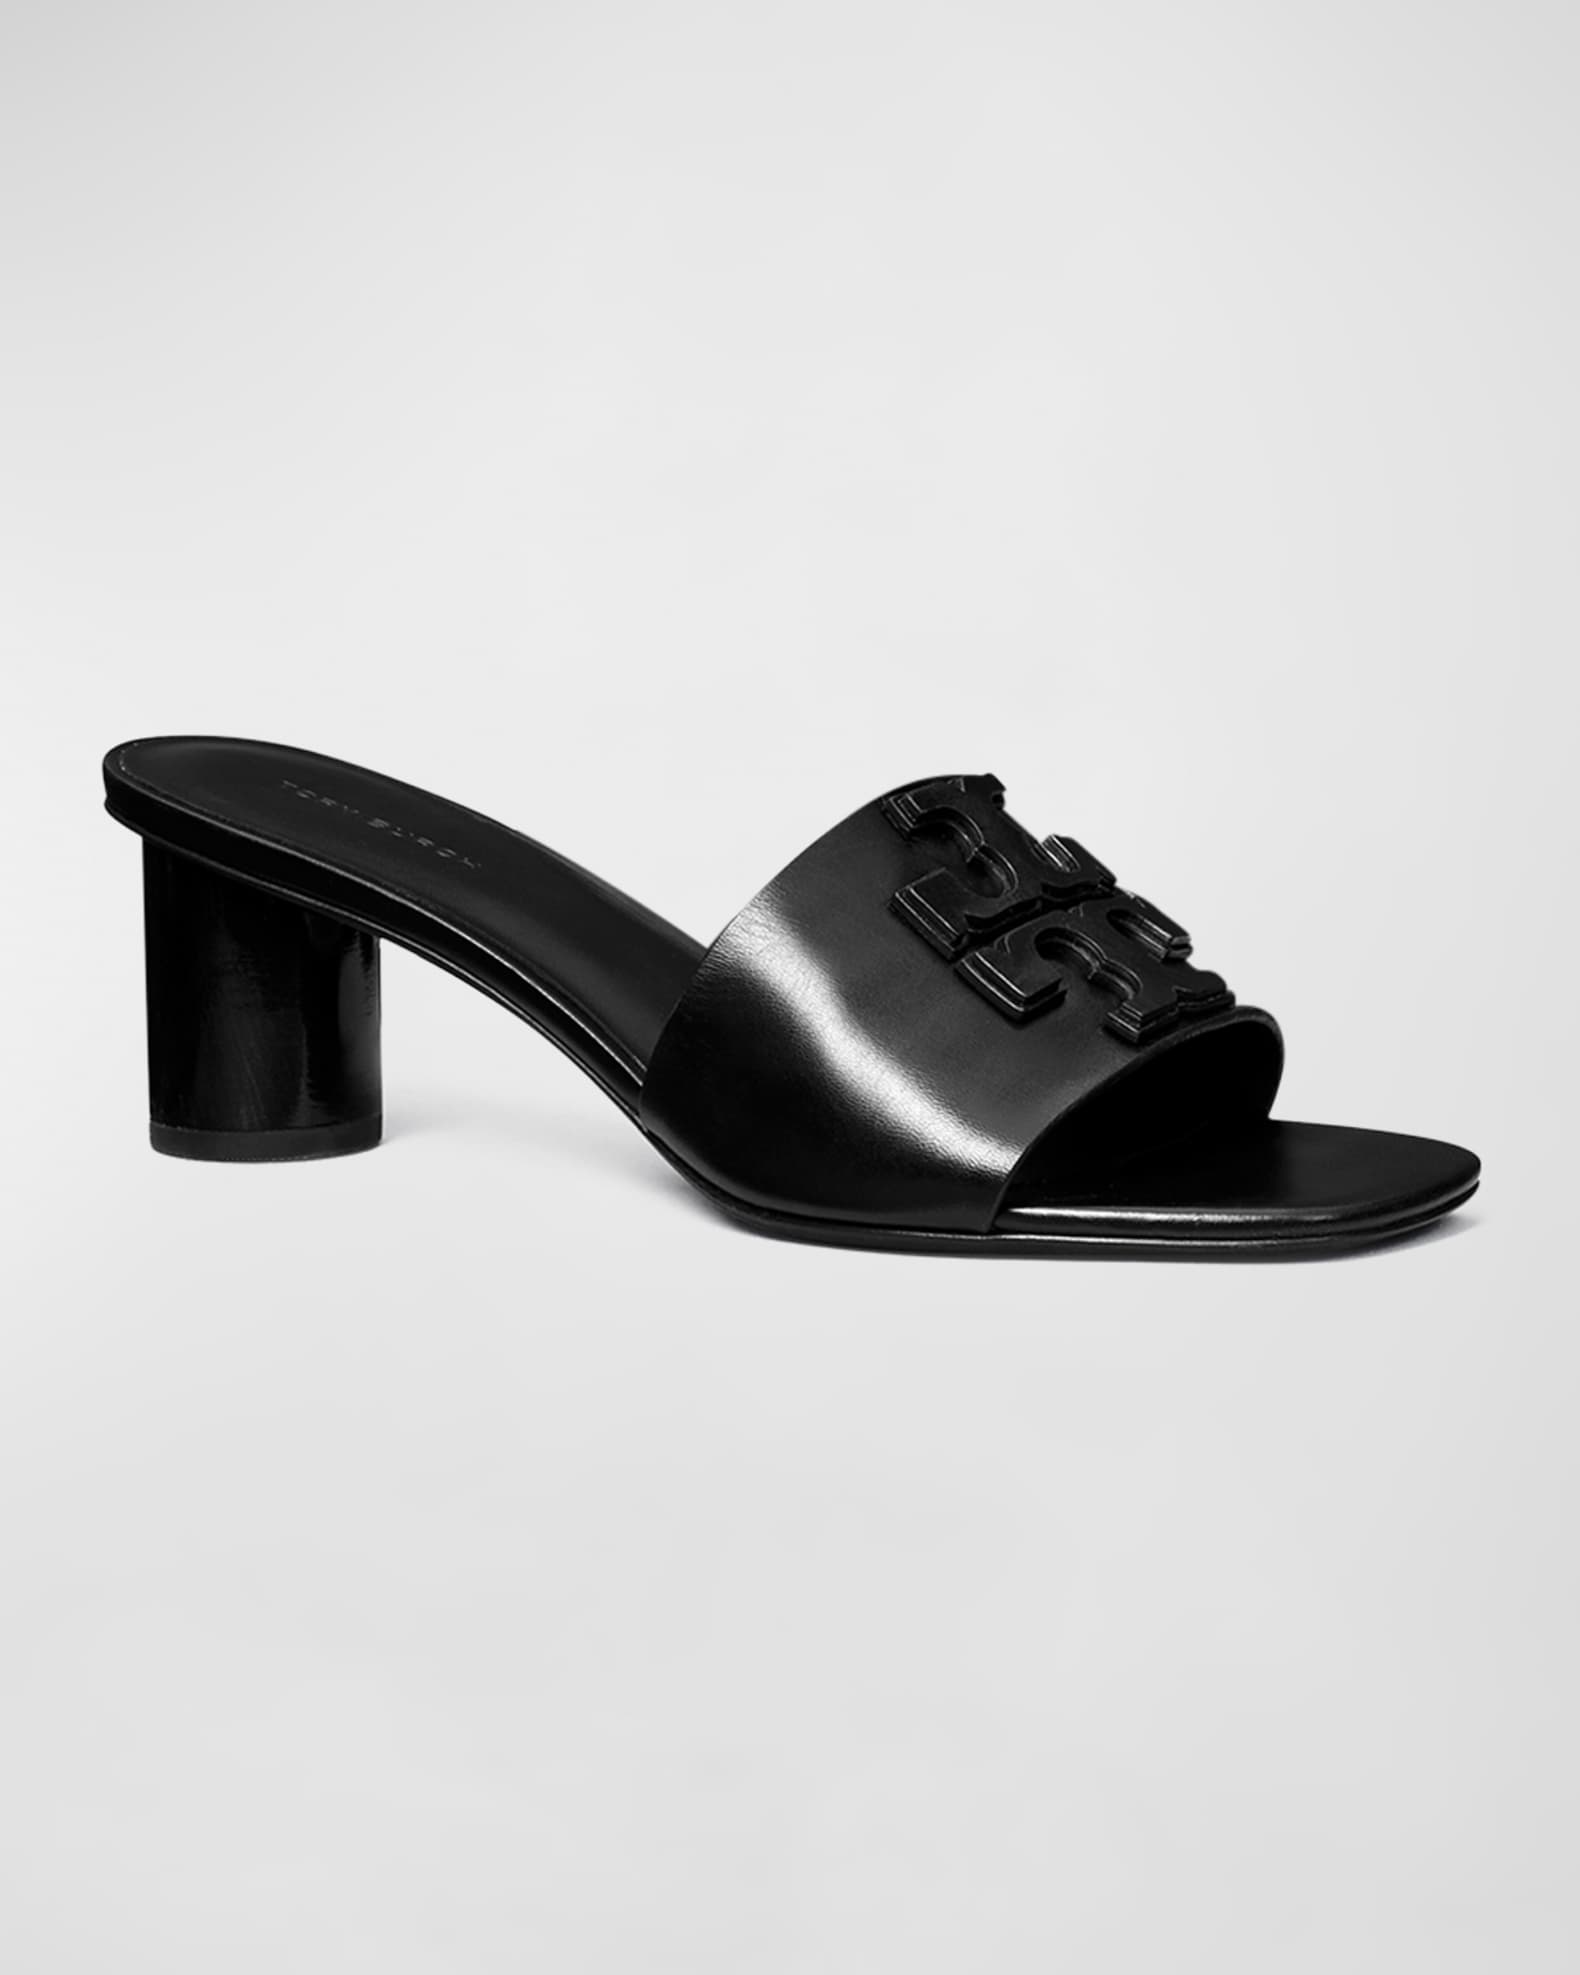 Tory Burch Ines Leather Logo Mule Sandals | Neiman Marcus